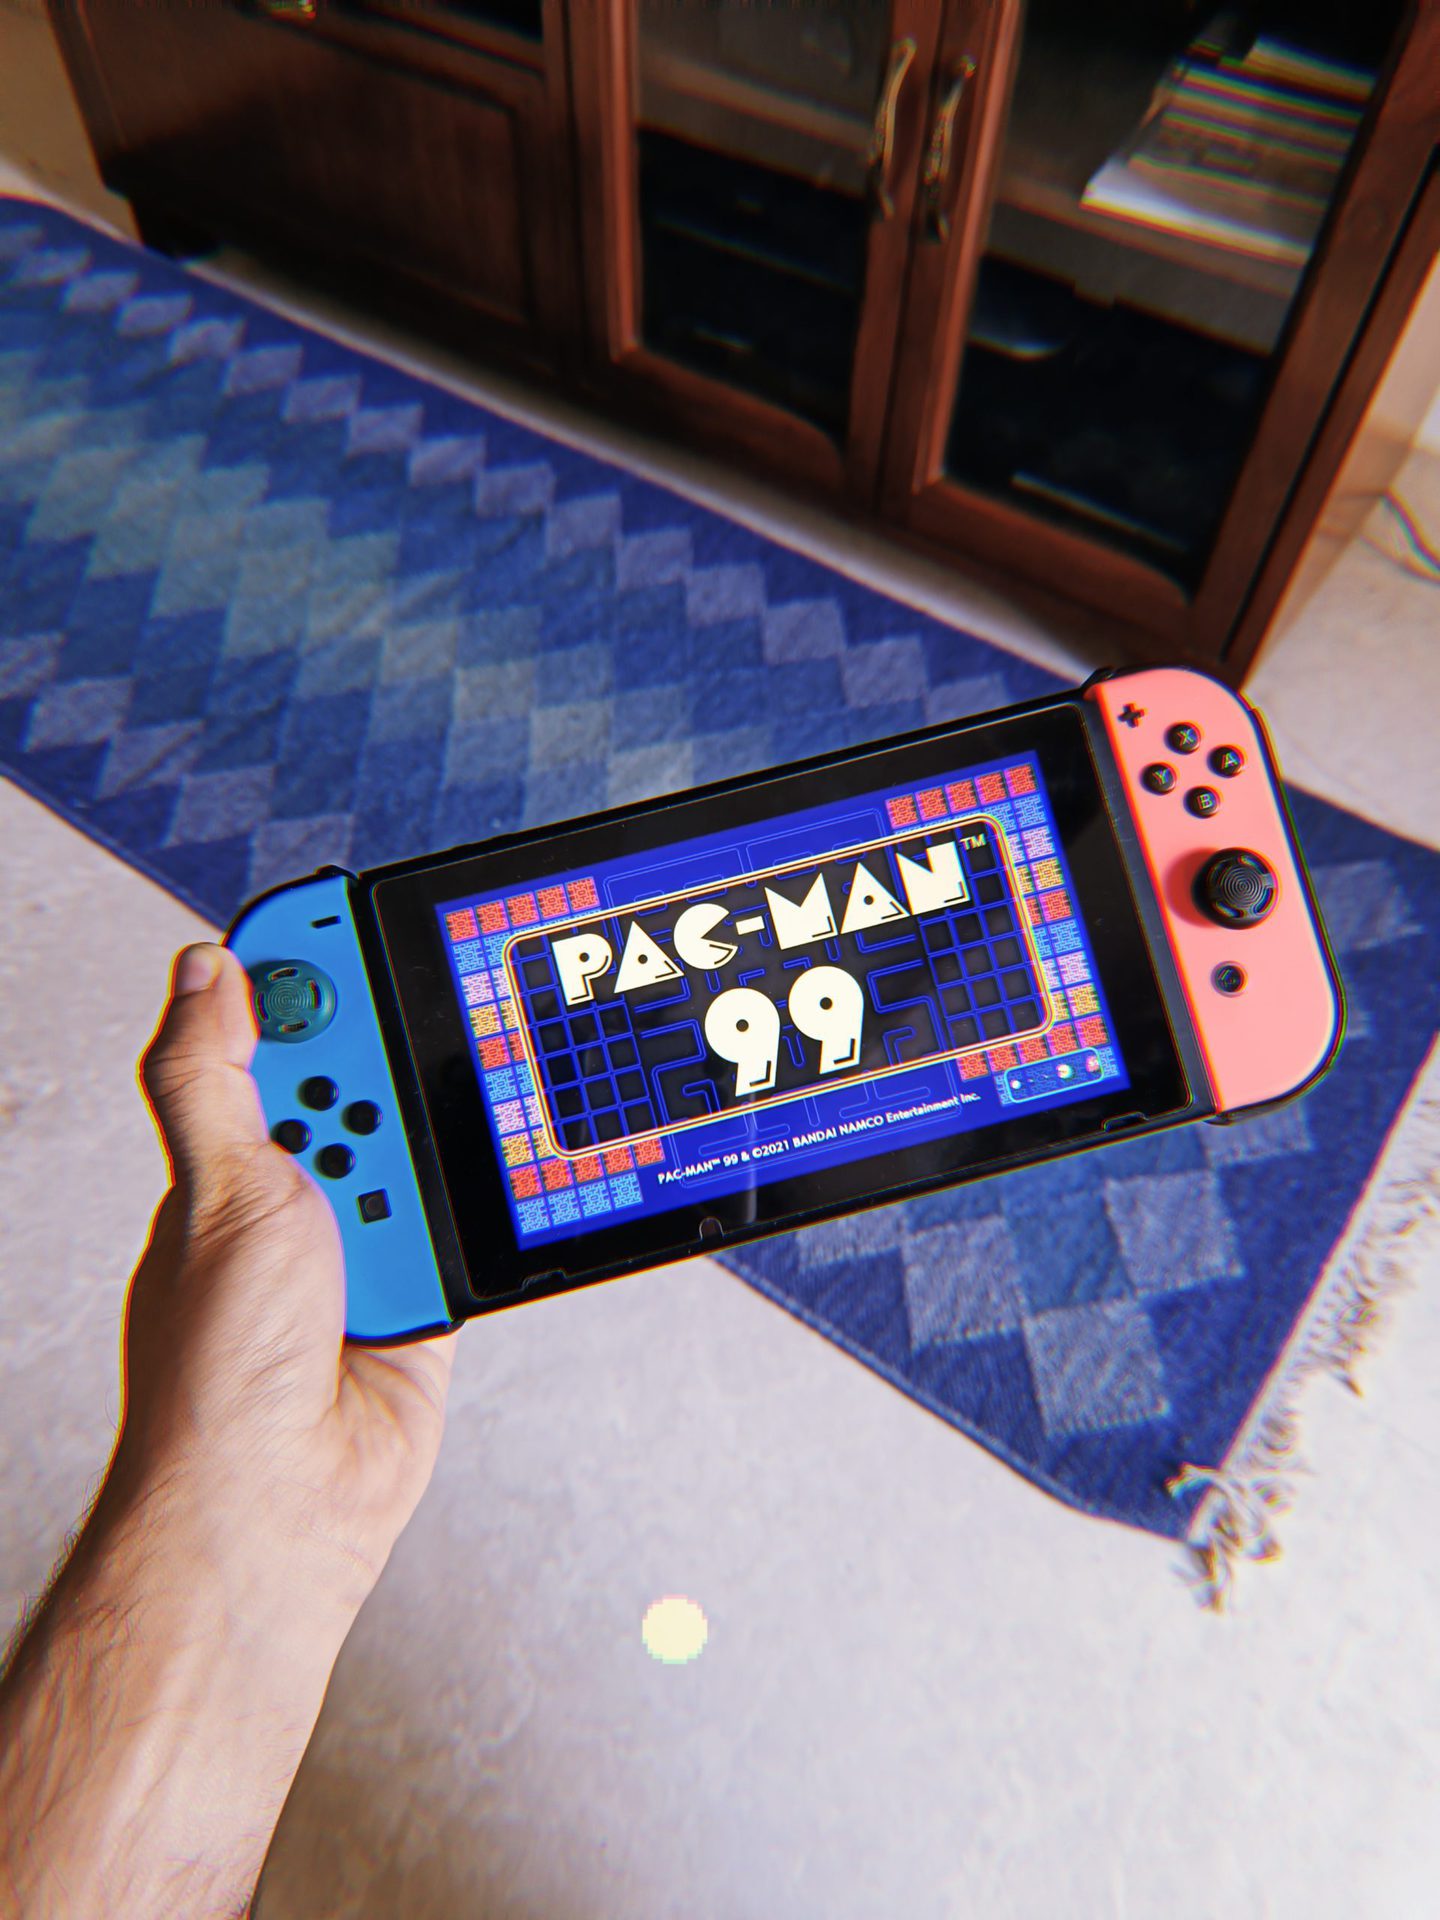 OnePlus Nord 2 pac man edition filter showing pacman 99 on switch